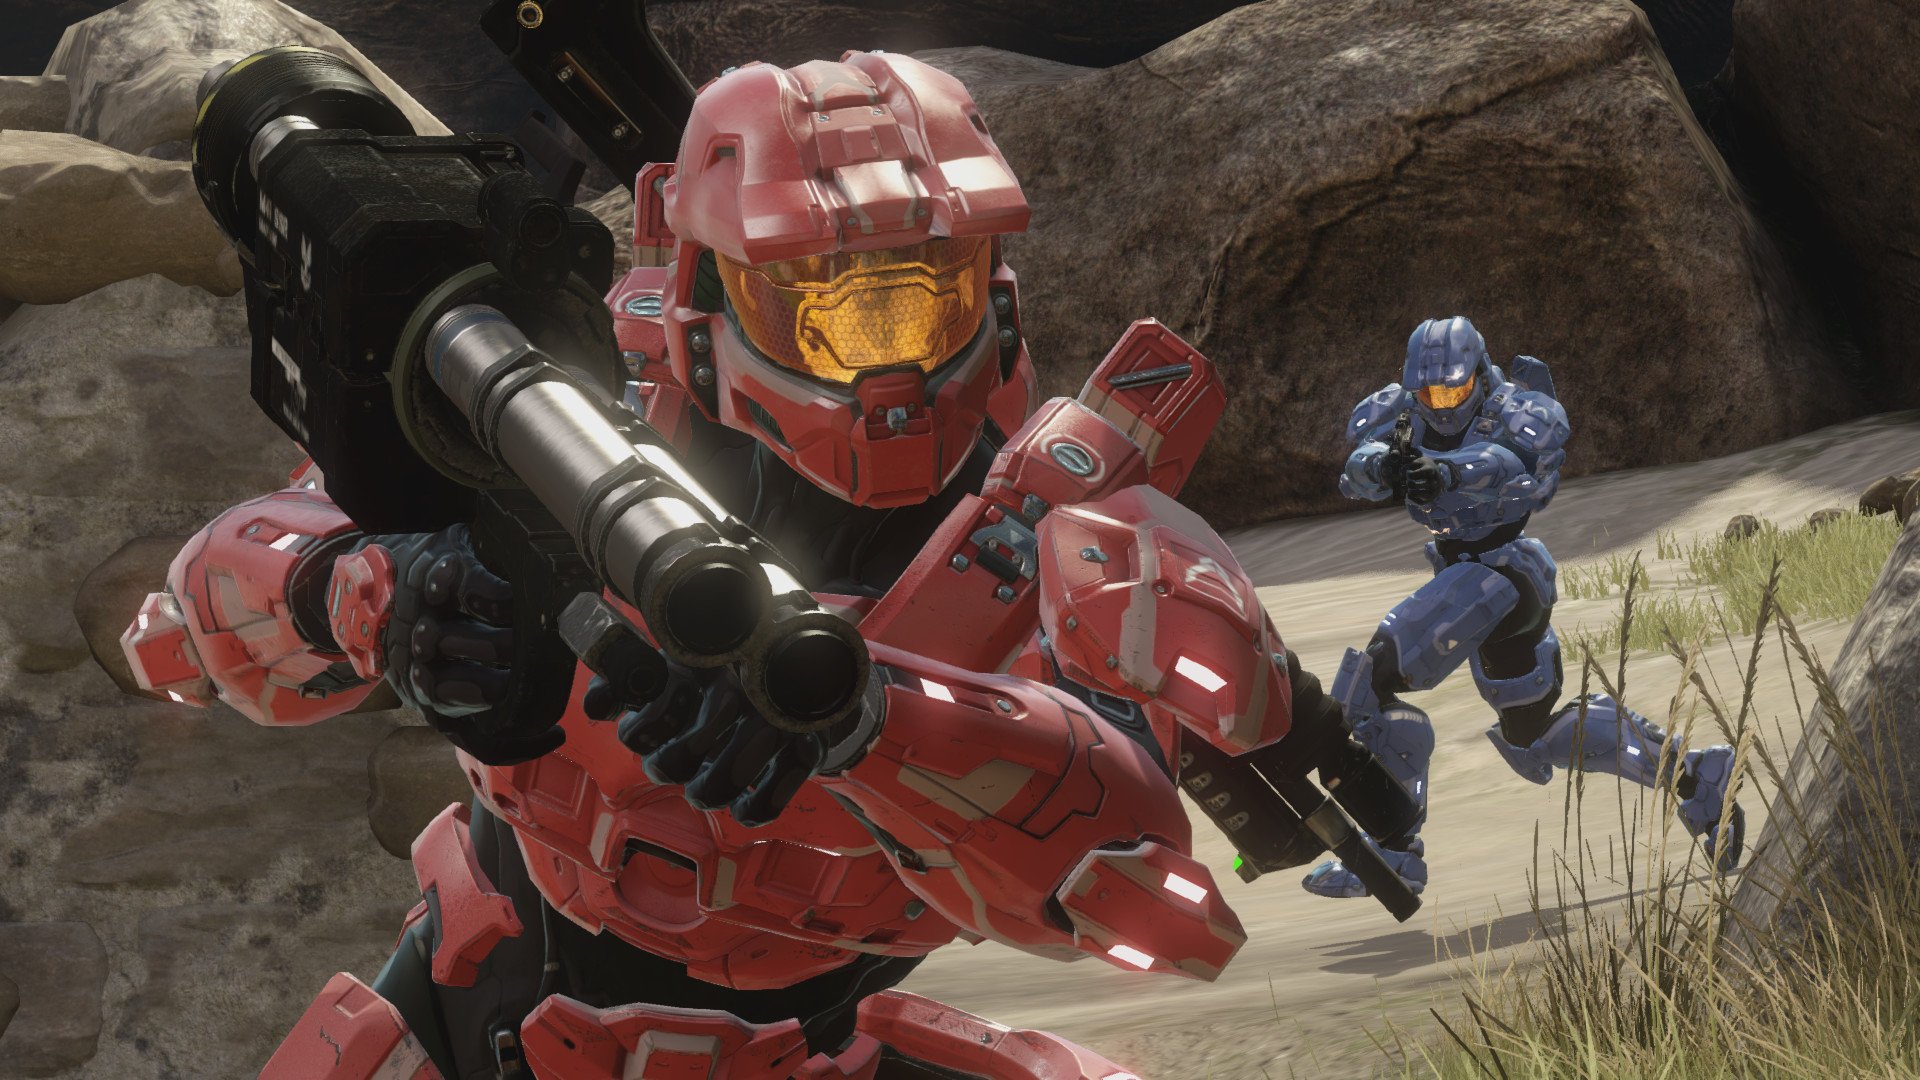 Halo: The Master Chief Collection's next content update detailed